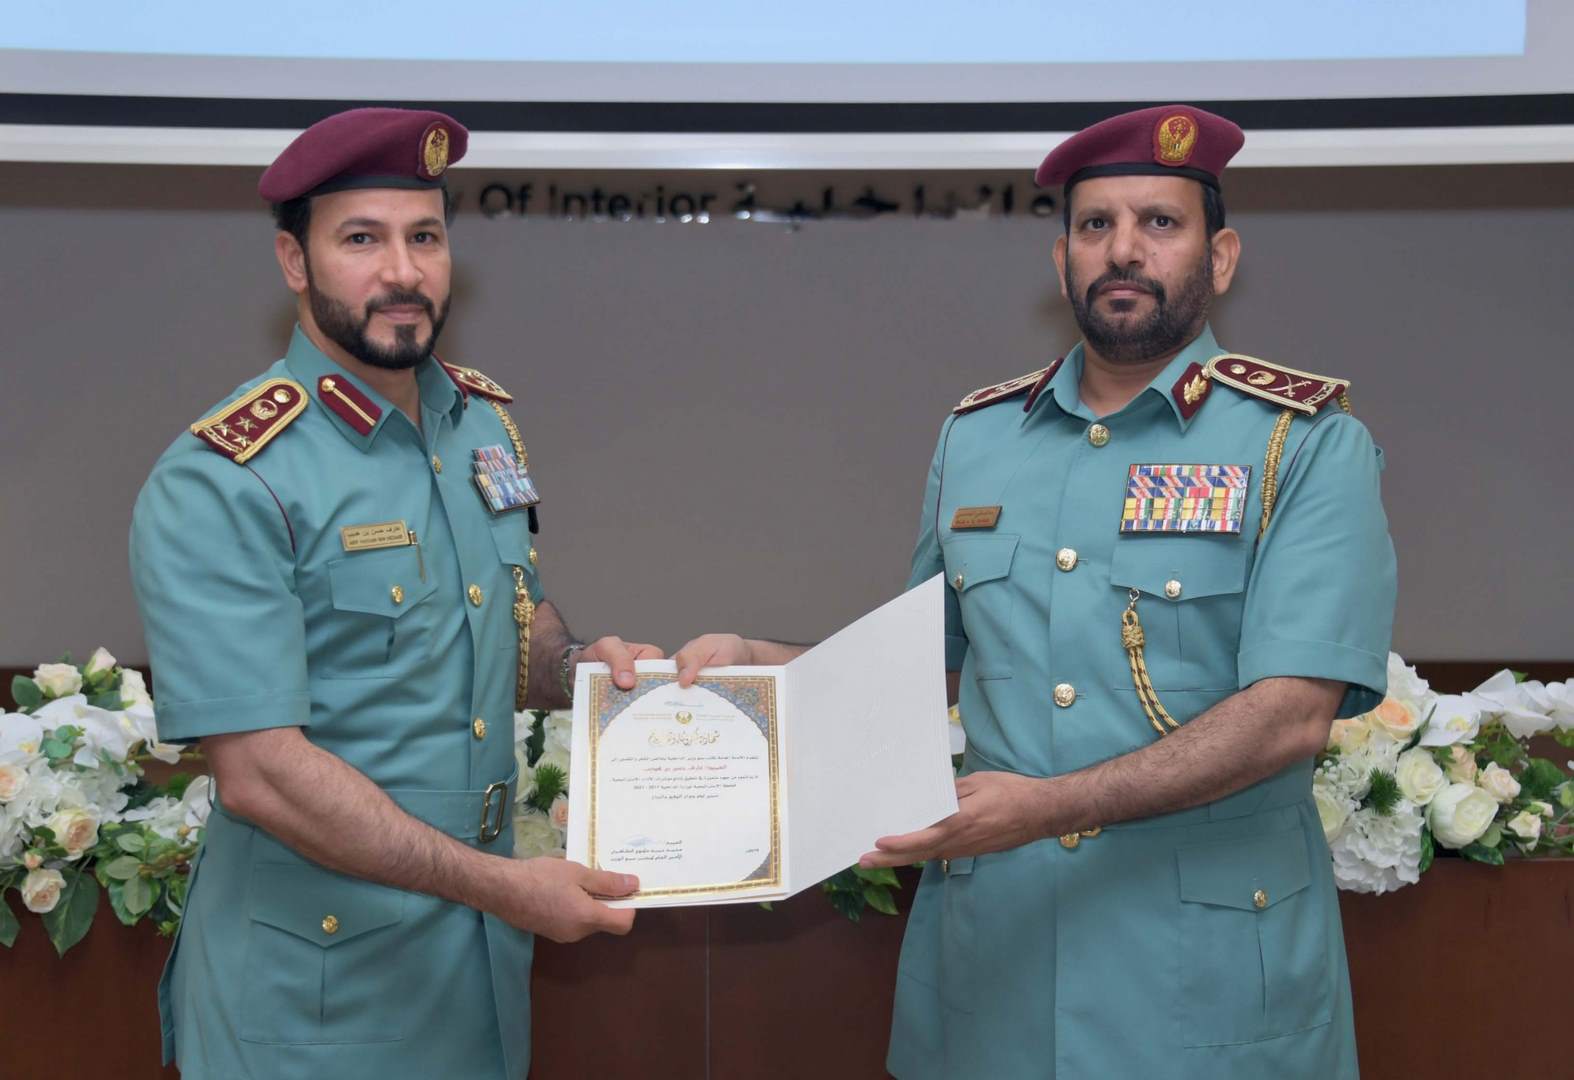 BEST POLICE PRACTICES FORUM AT THE MINISTRY OF INTERIOR